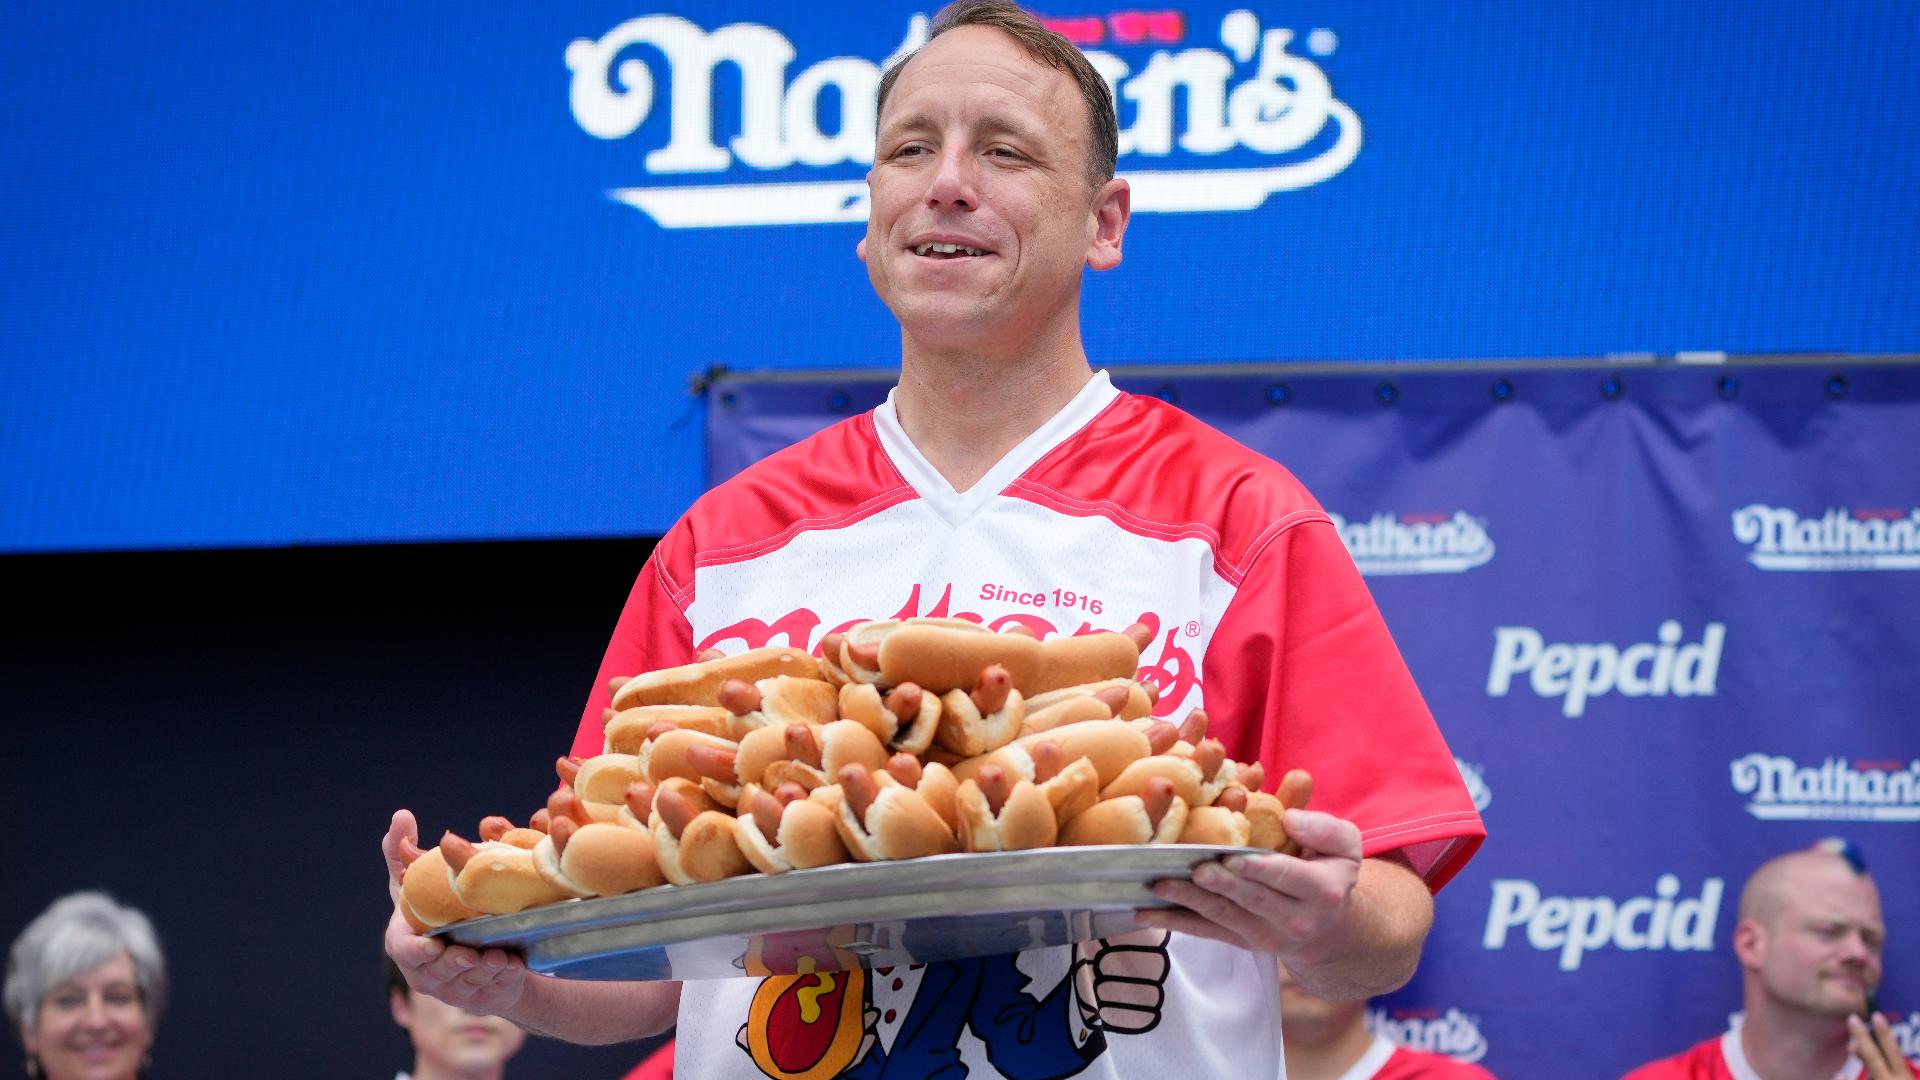 Joey “Jaws” Chestnut will not participate in this year's event after signing a deal with a rival brand, organizers said,